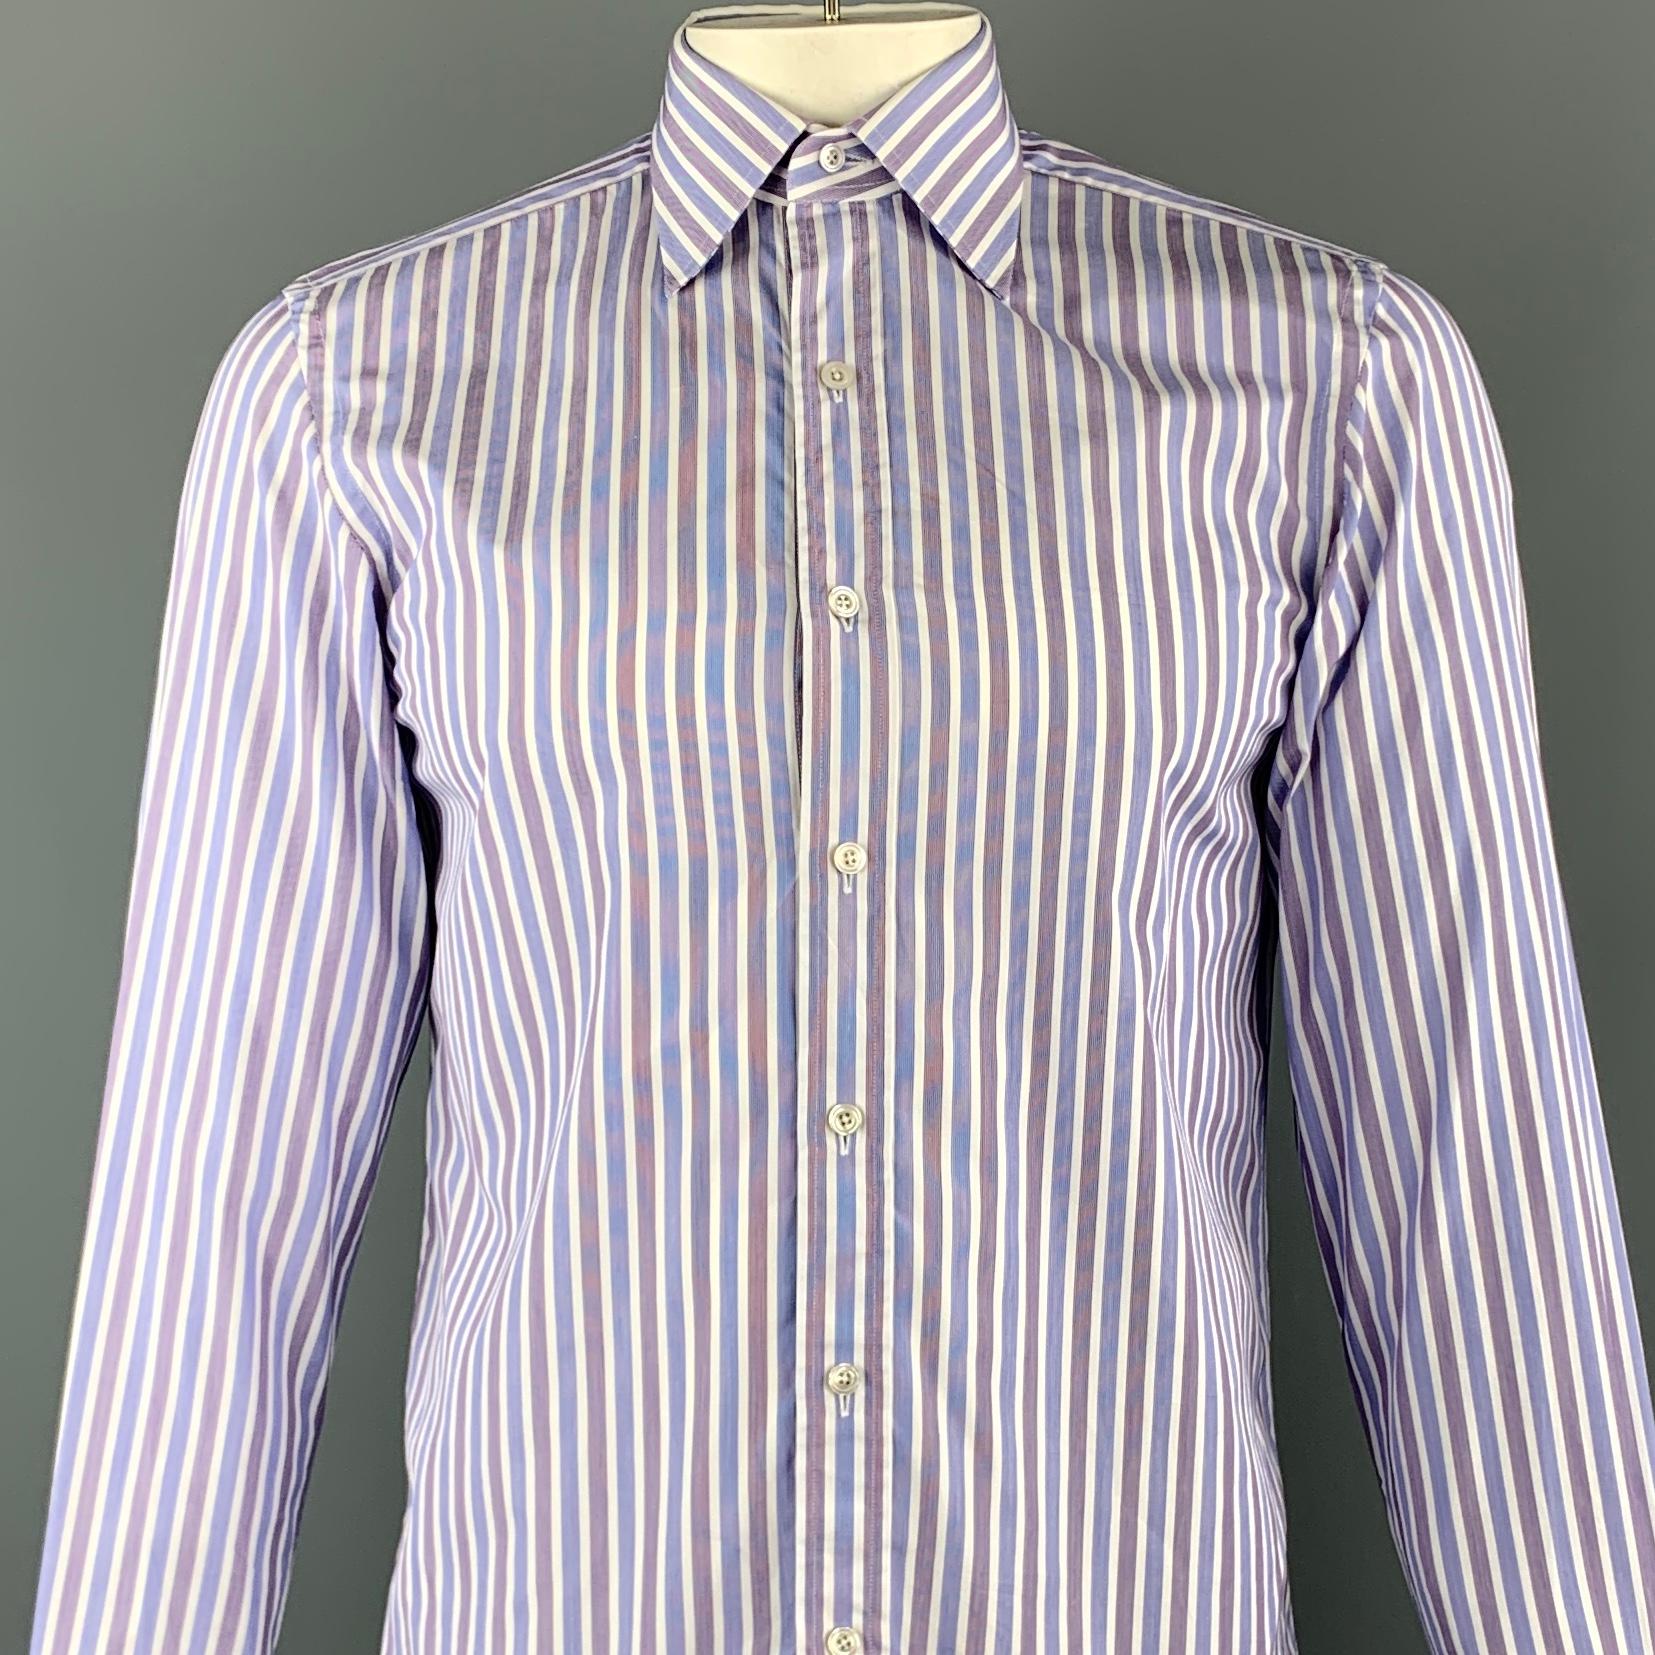 TOM FORD long sleeve shirt comes in a blue and white vertical stripe cotton featuring a button up style, french cuff sleeves, and spread collar. Doesn't come with cufflinks. Made in Switzerland.

Excellent Pre-Owned Condition.
Marked: 39 /